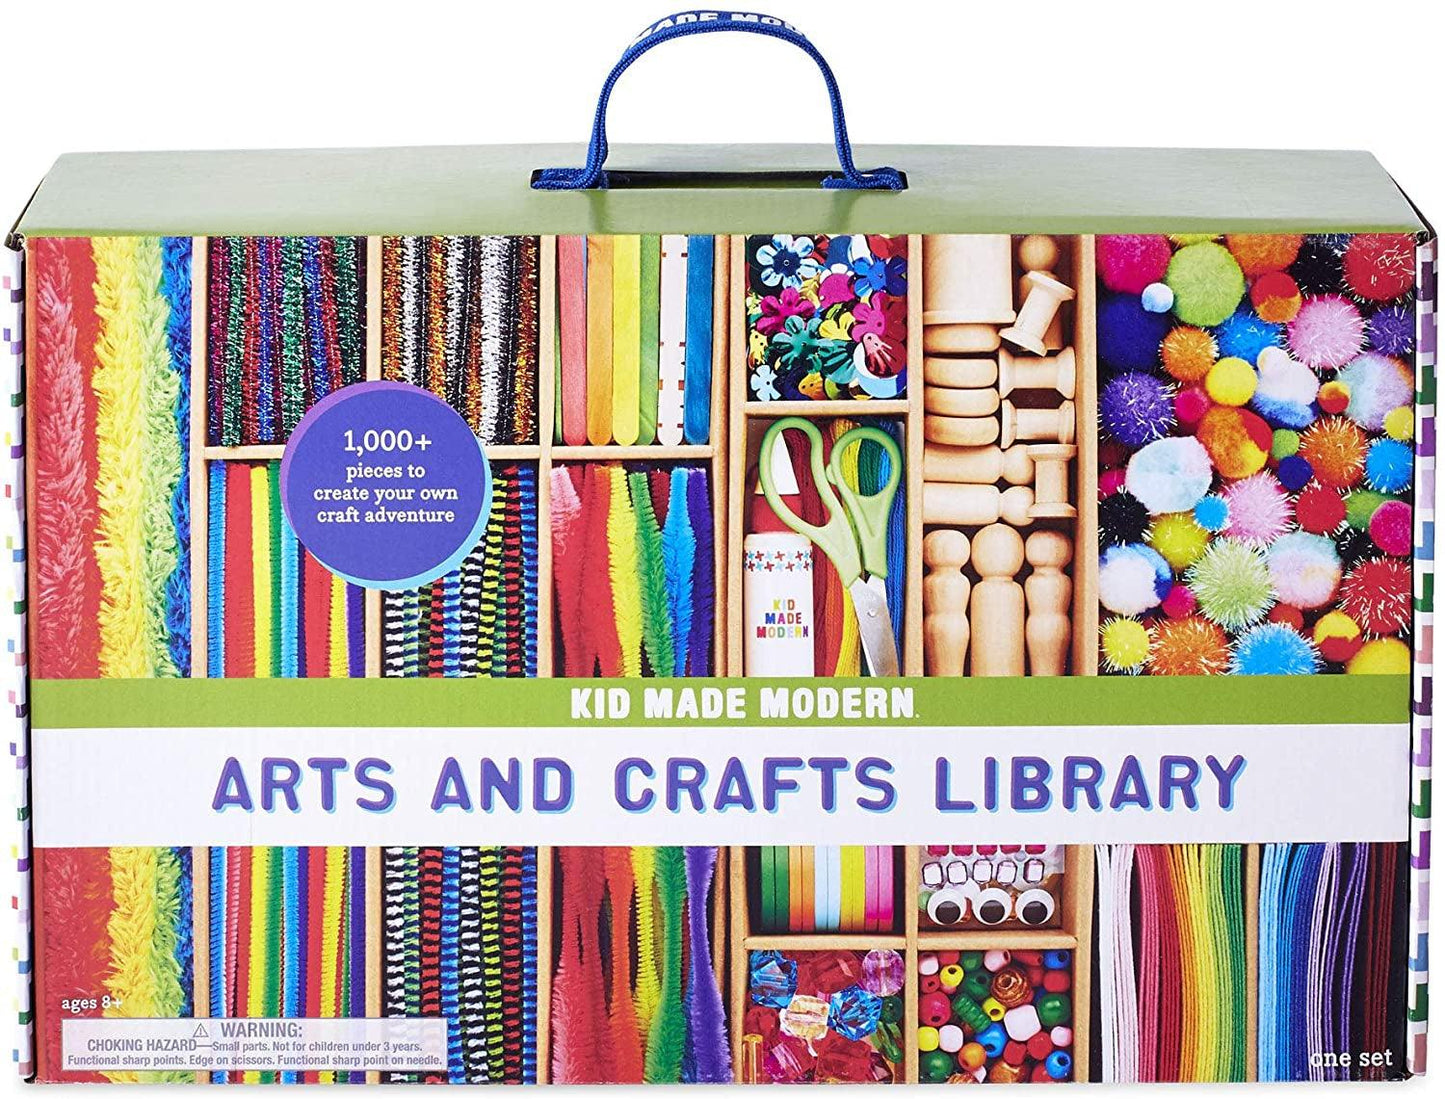  Arts and Crafts for Kids, 2200+ Piece Craft Kit